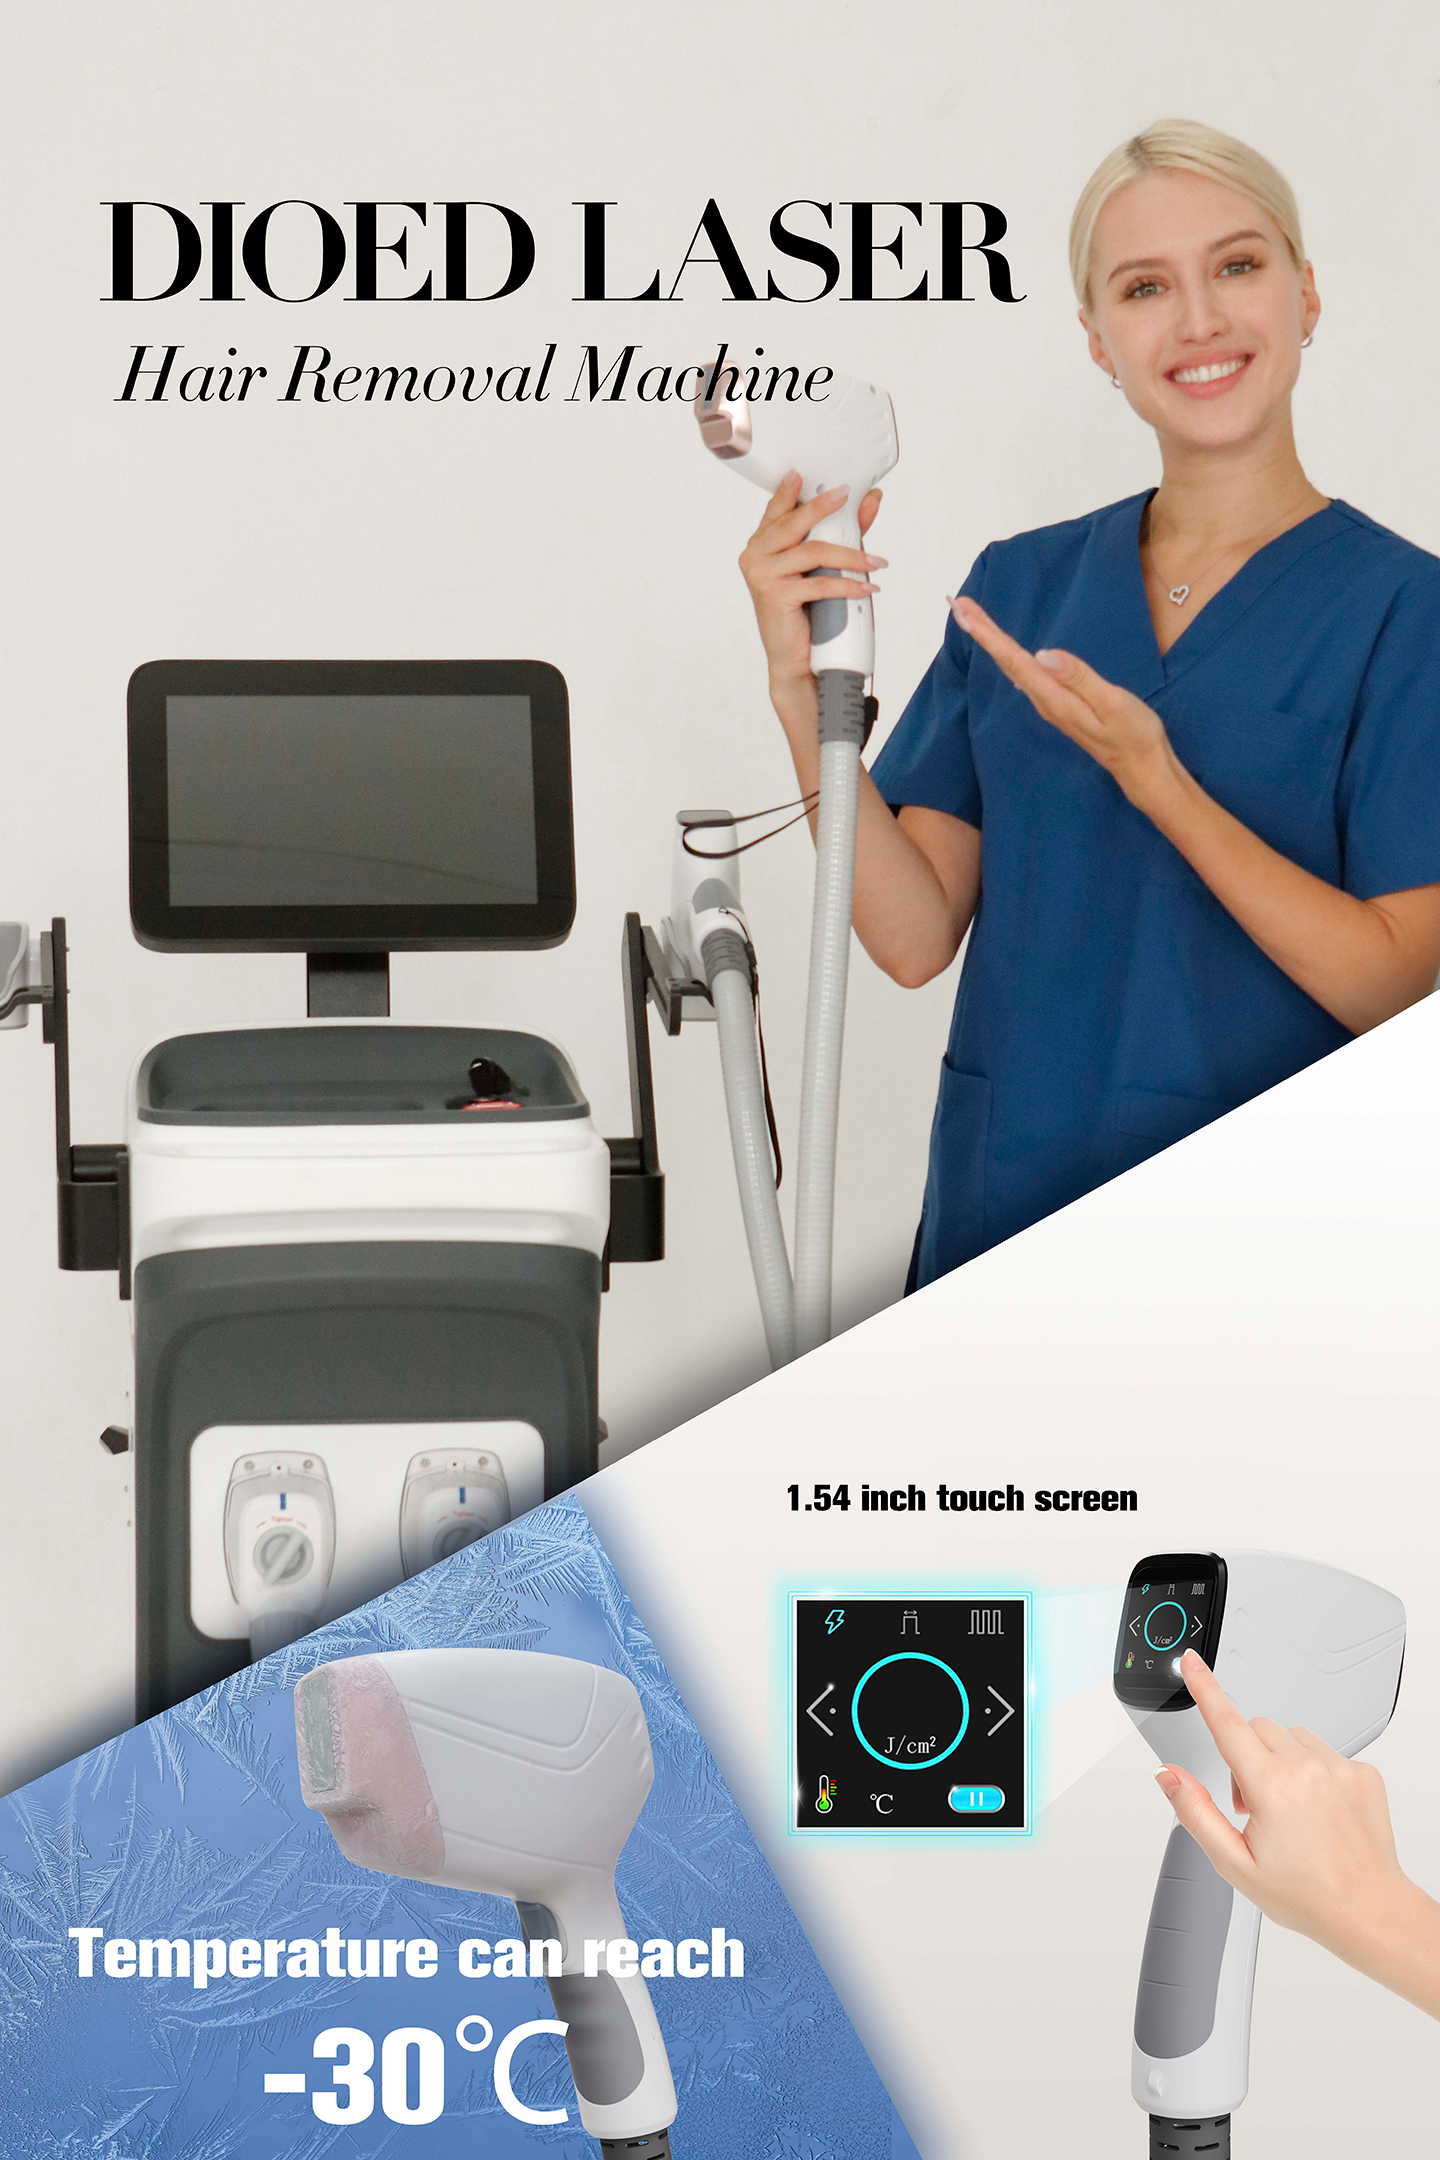 Diode Laser Hair Removal|laser hair removal|hair removal laser - NUBWAY